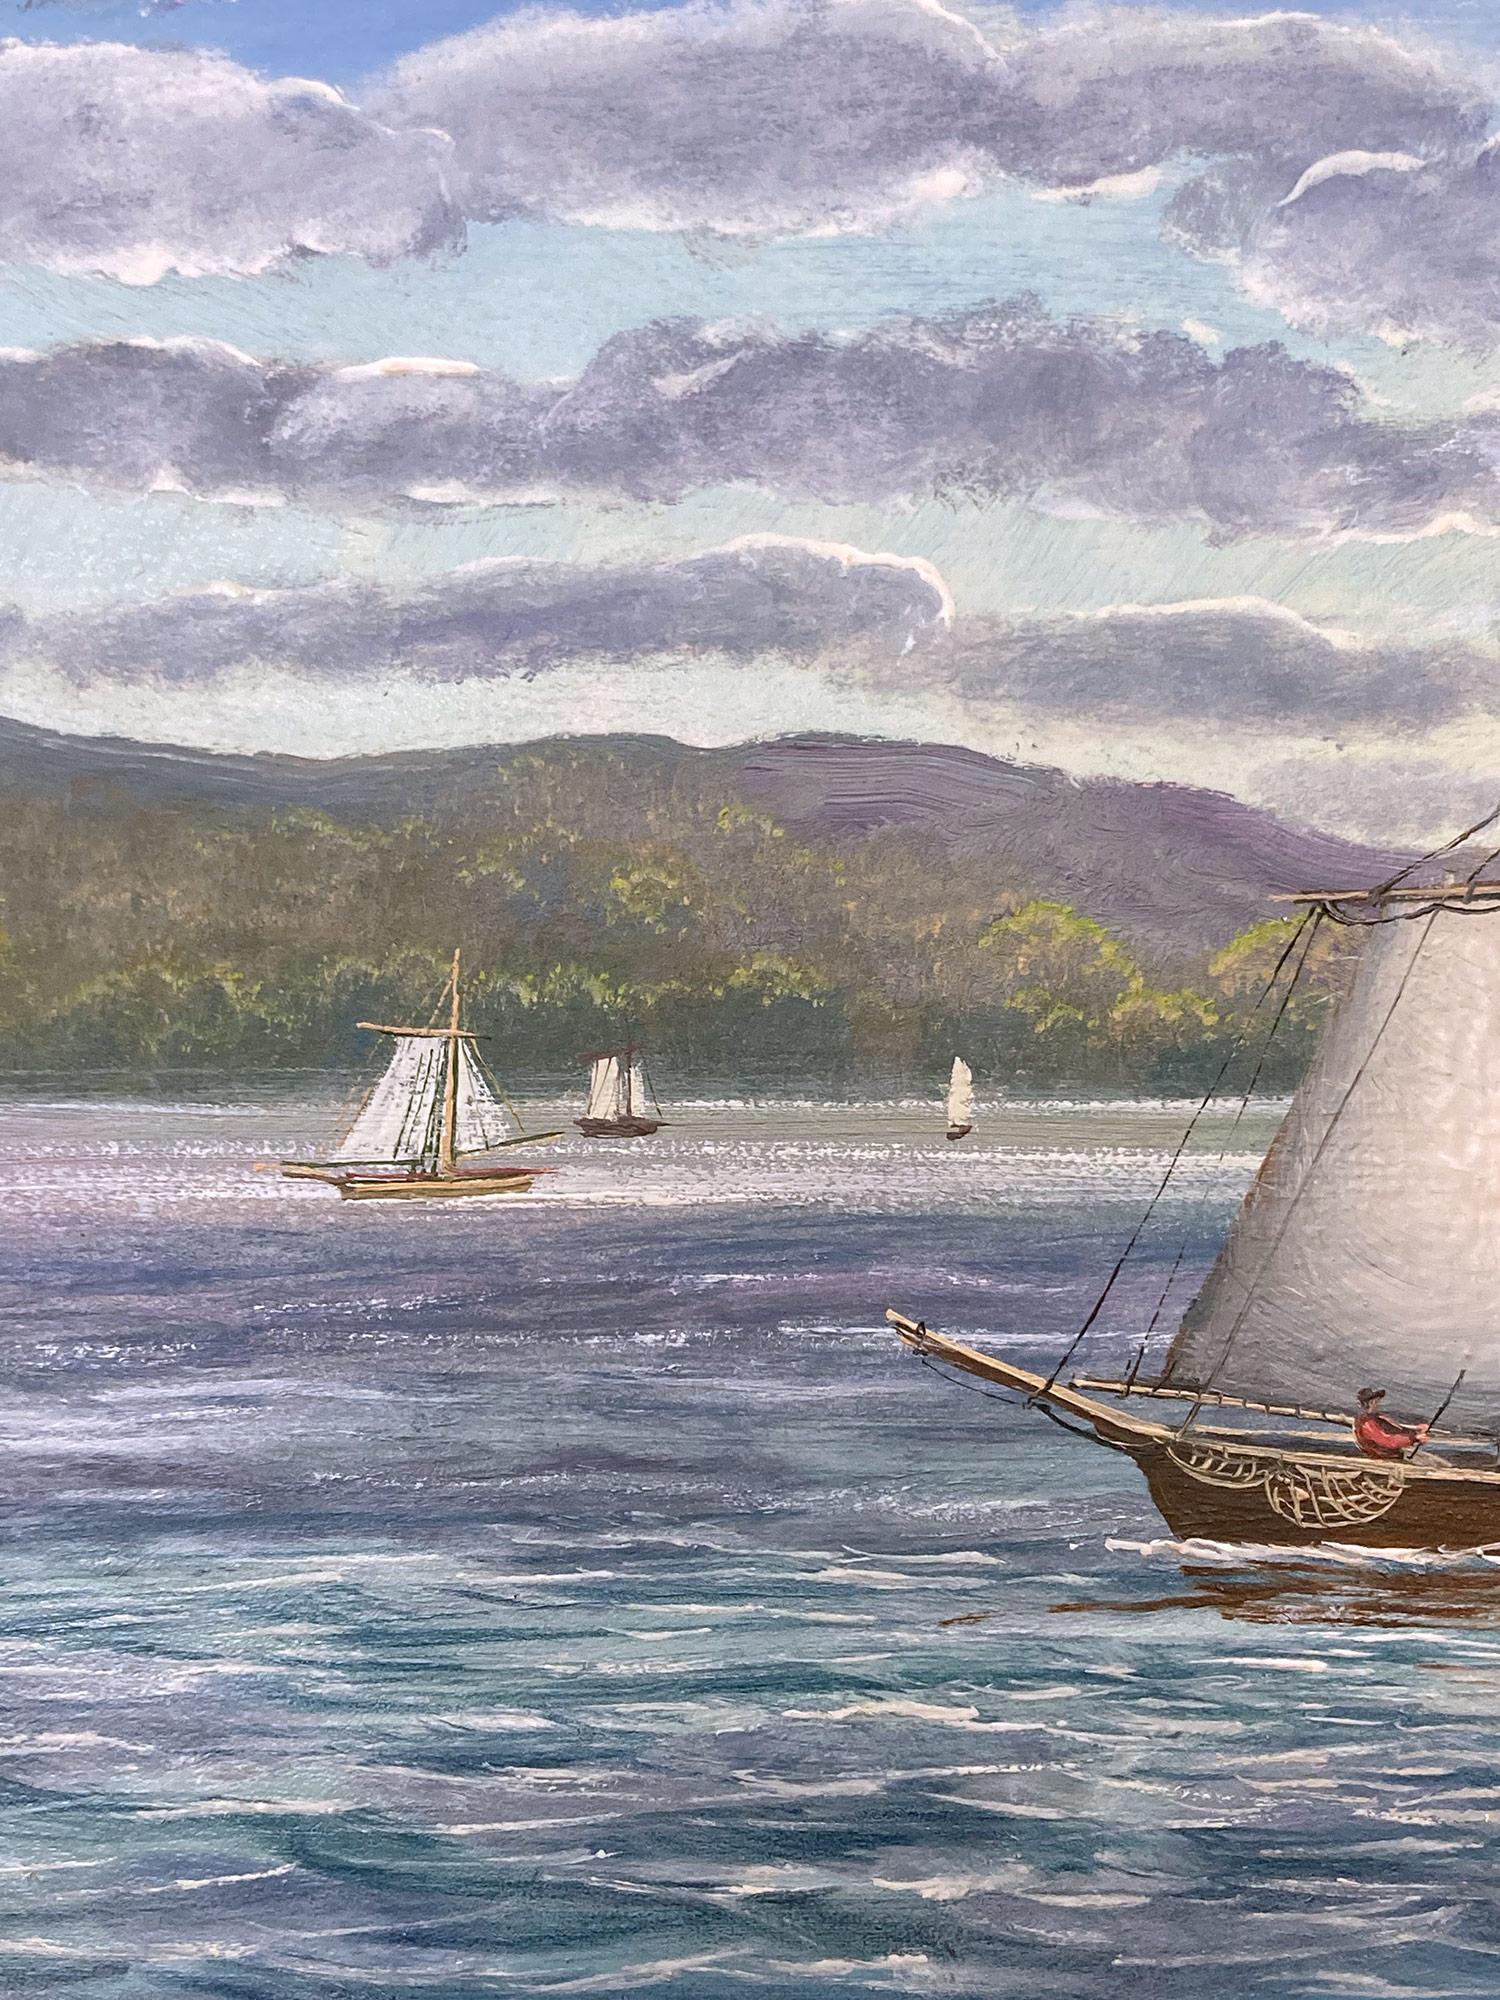 A Fine depiction of a Sailing Ship in the Hudson River. For this wonderful depiction, Nemethy uses a Fine technique which depicts the figures on the boat in a miniature way. With joyful colors, this piece is bright and peaceful. This painting is